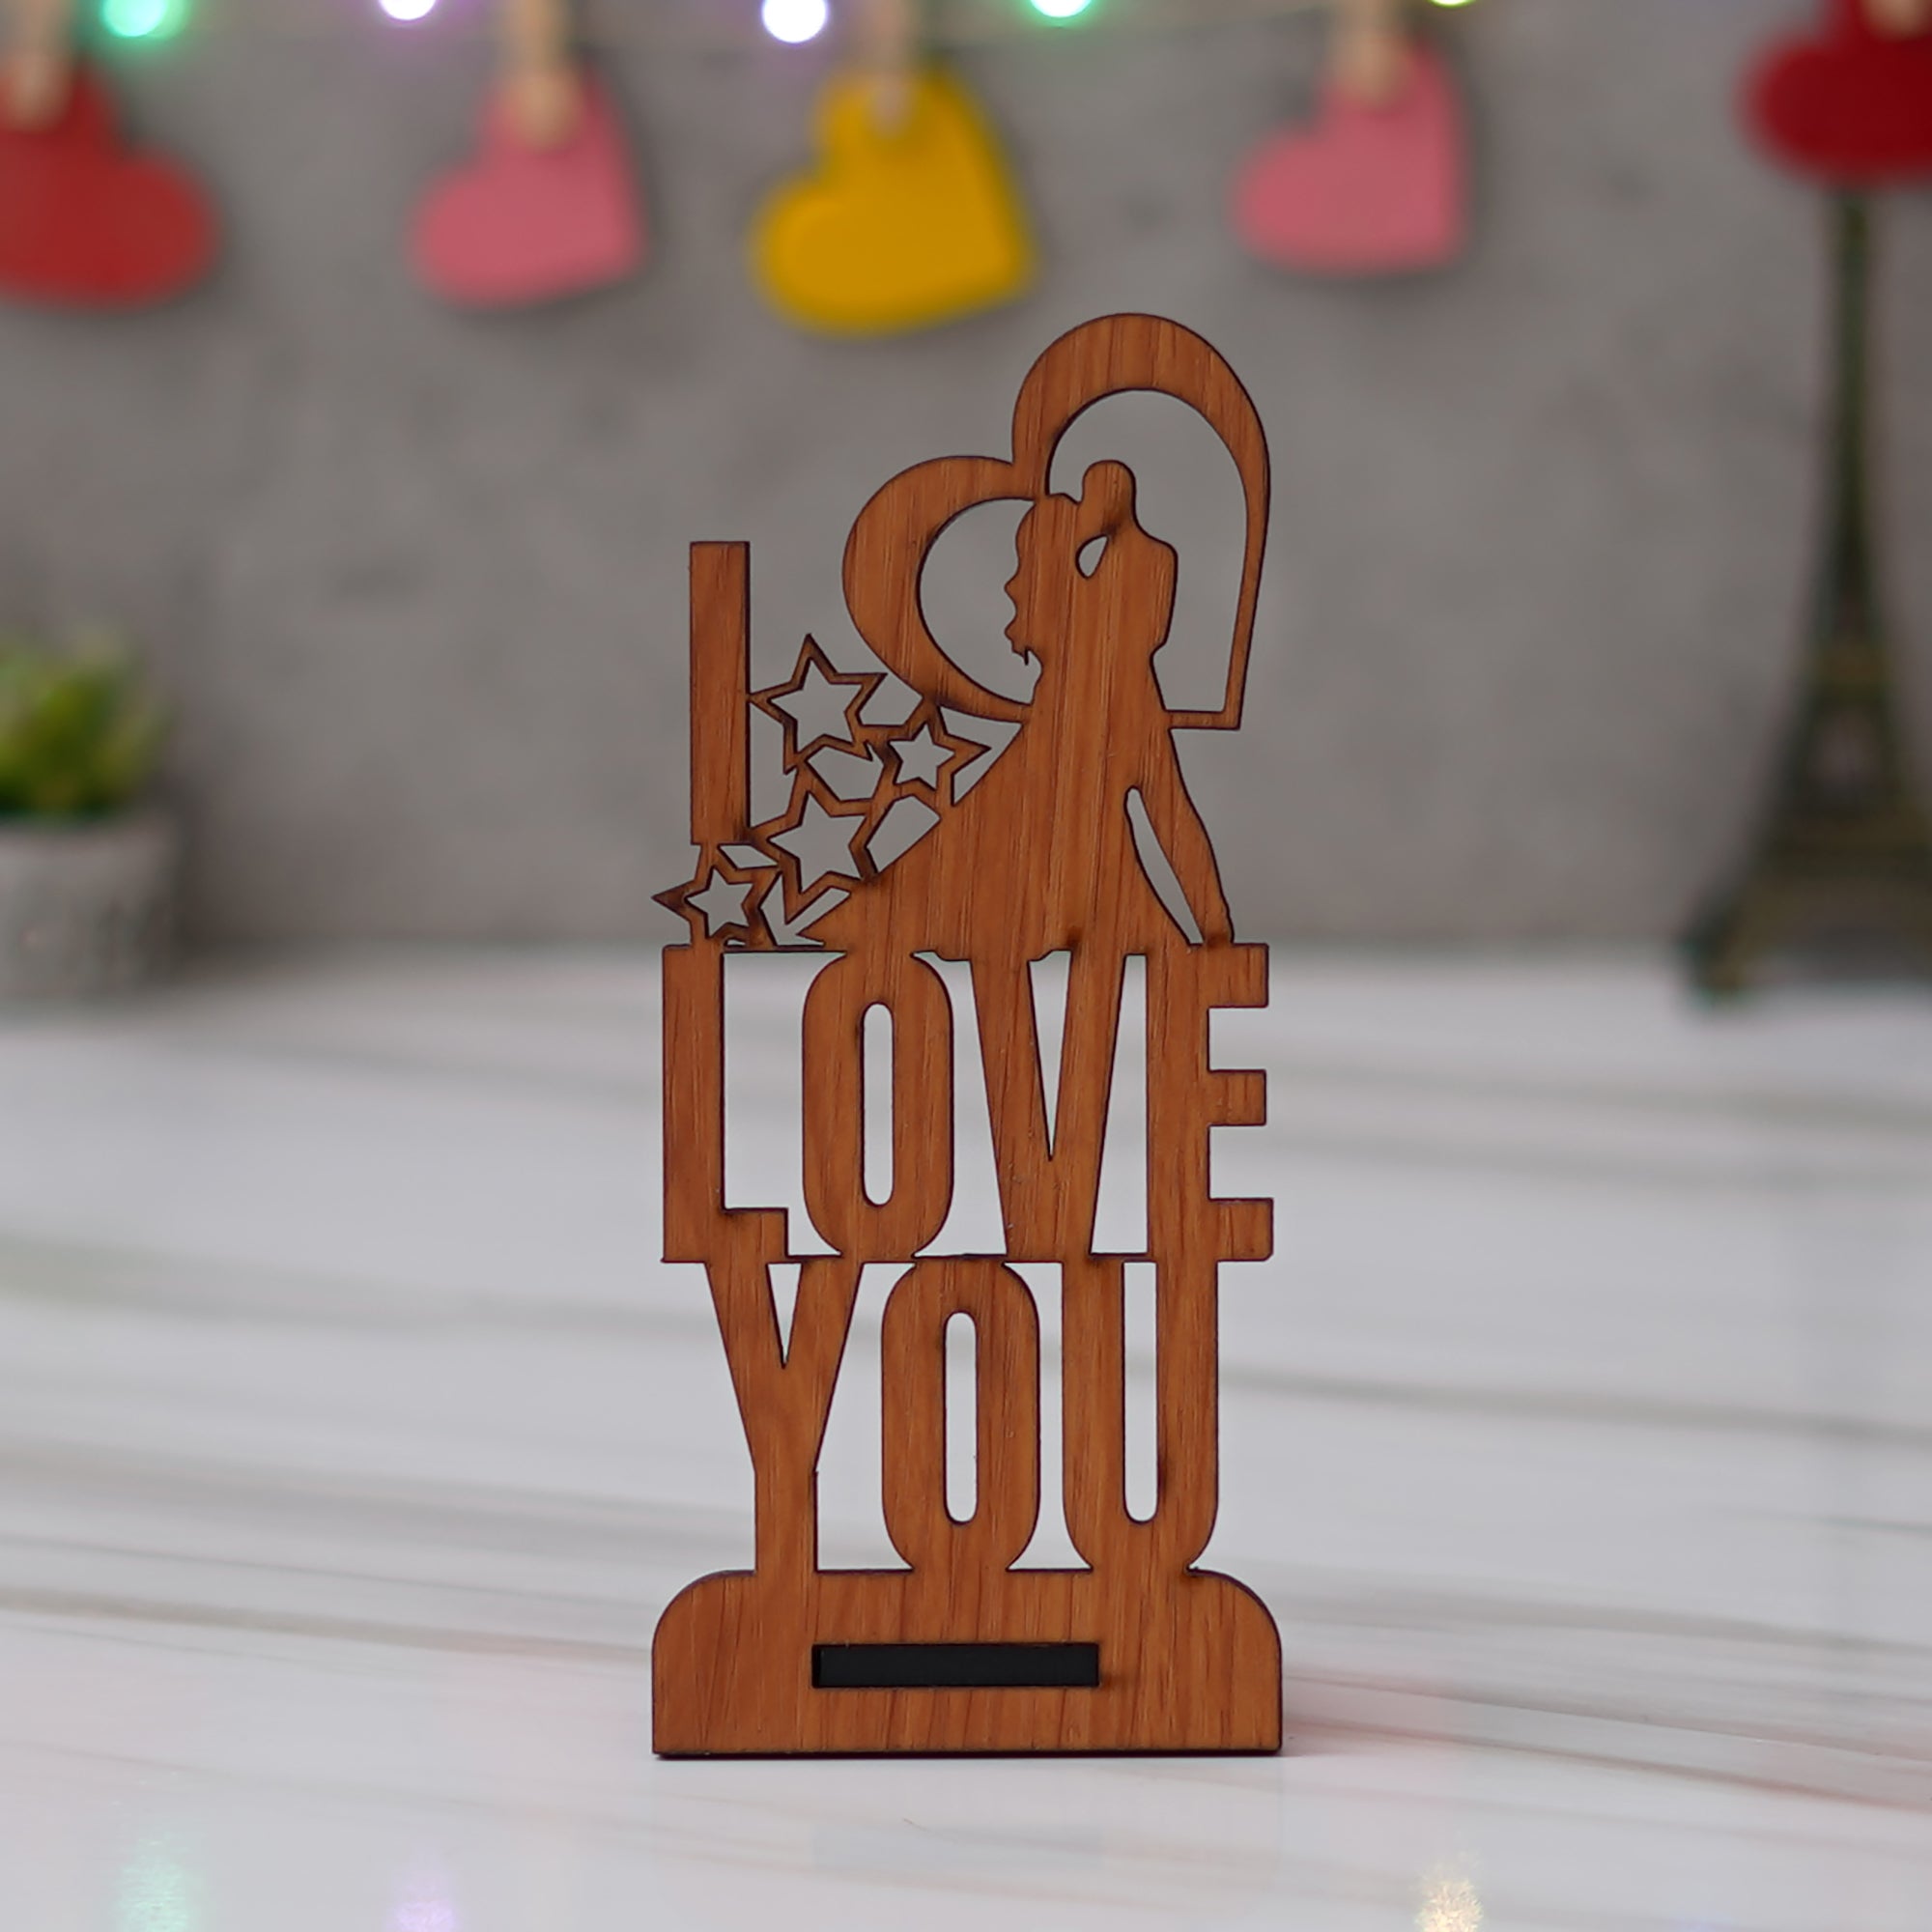 Valentine Combo of Pack of 8 Love Gift Cards, "Love You" Wooden Showpiece With Stand, Heart Shaped Gift Box Set with White Teddy and Red Roses 3